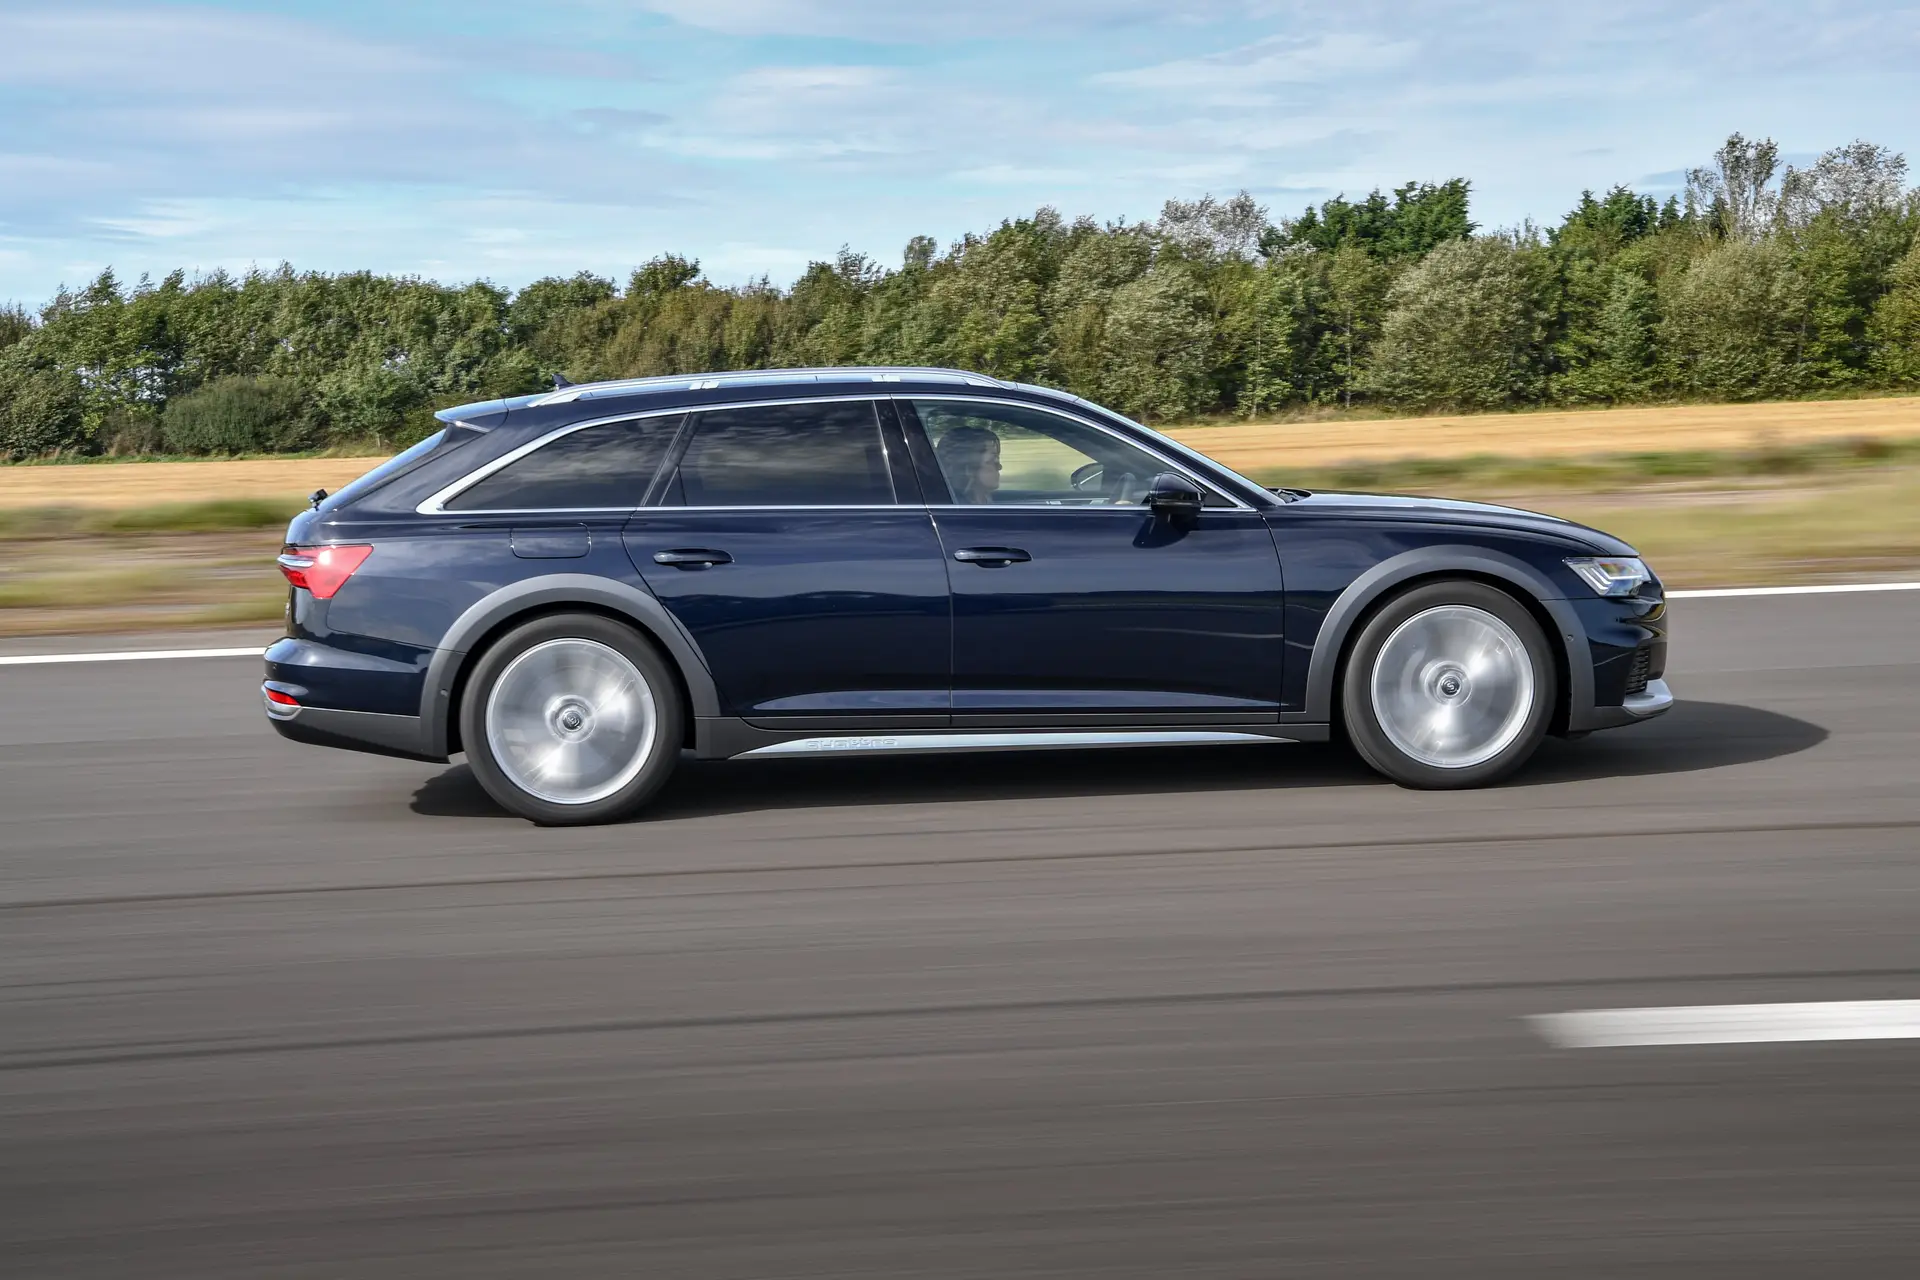 Audi A6 Allroad Review 2023: exterior side of the Audi A6 Allroad on the road